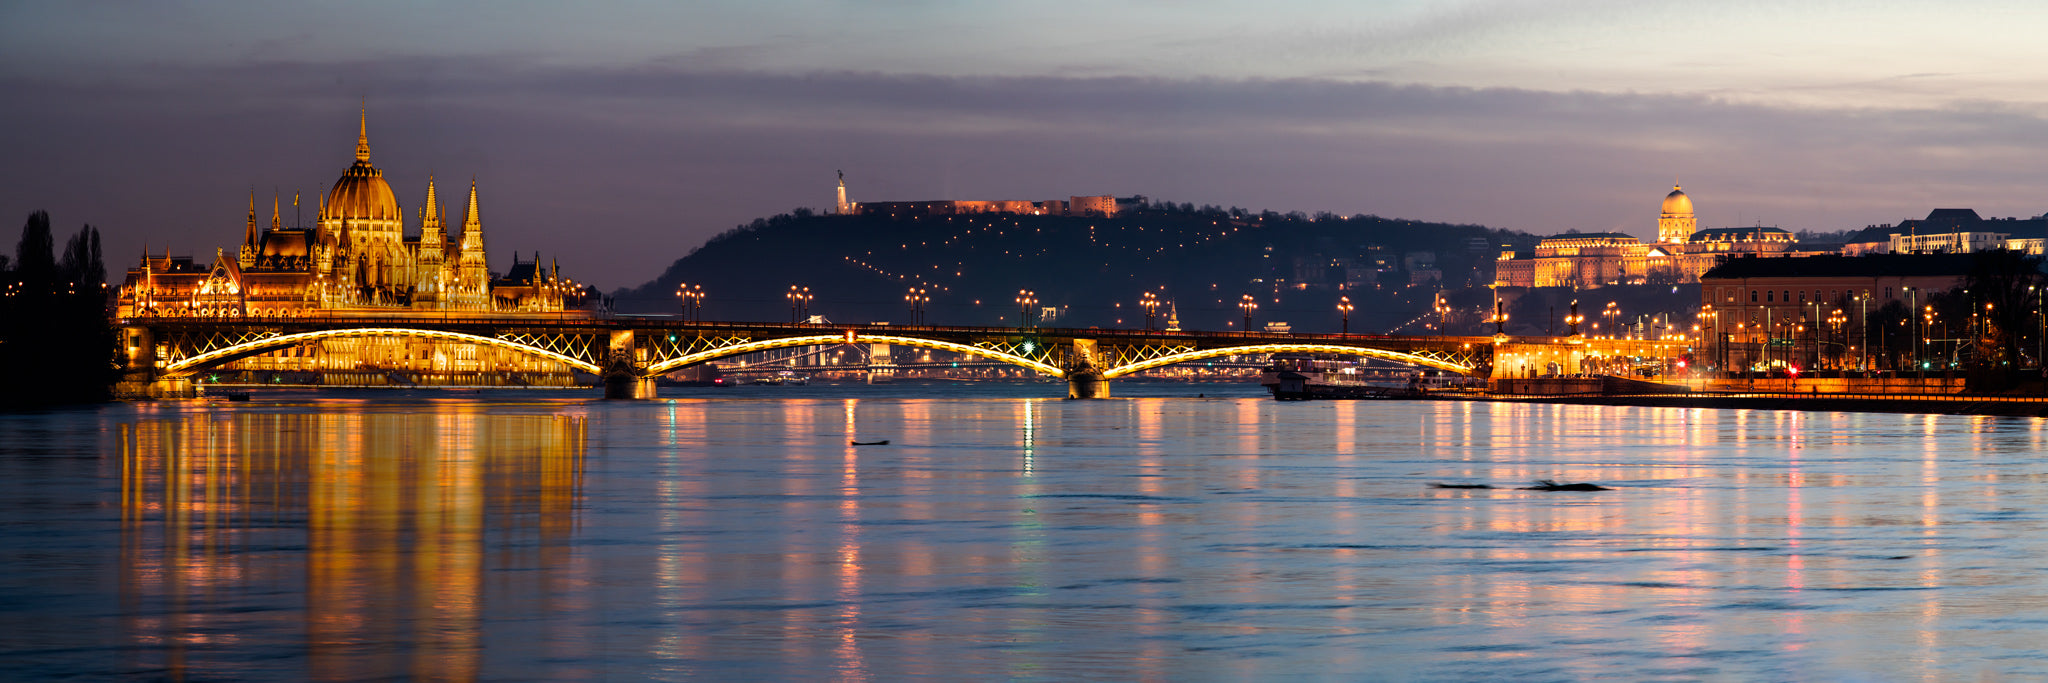 BUDAPEST PANORAMA No.9298CL        "THE NORTHERN GATE"